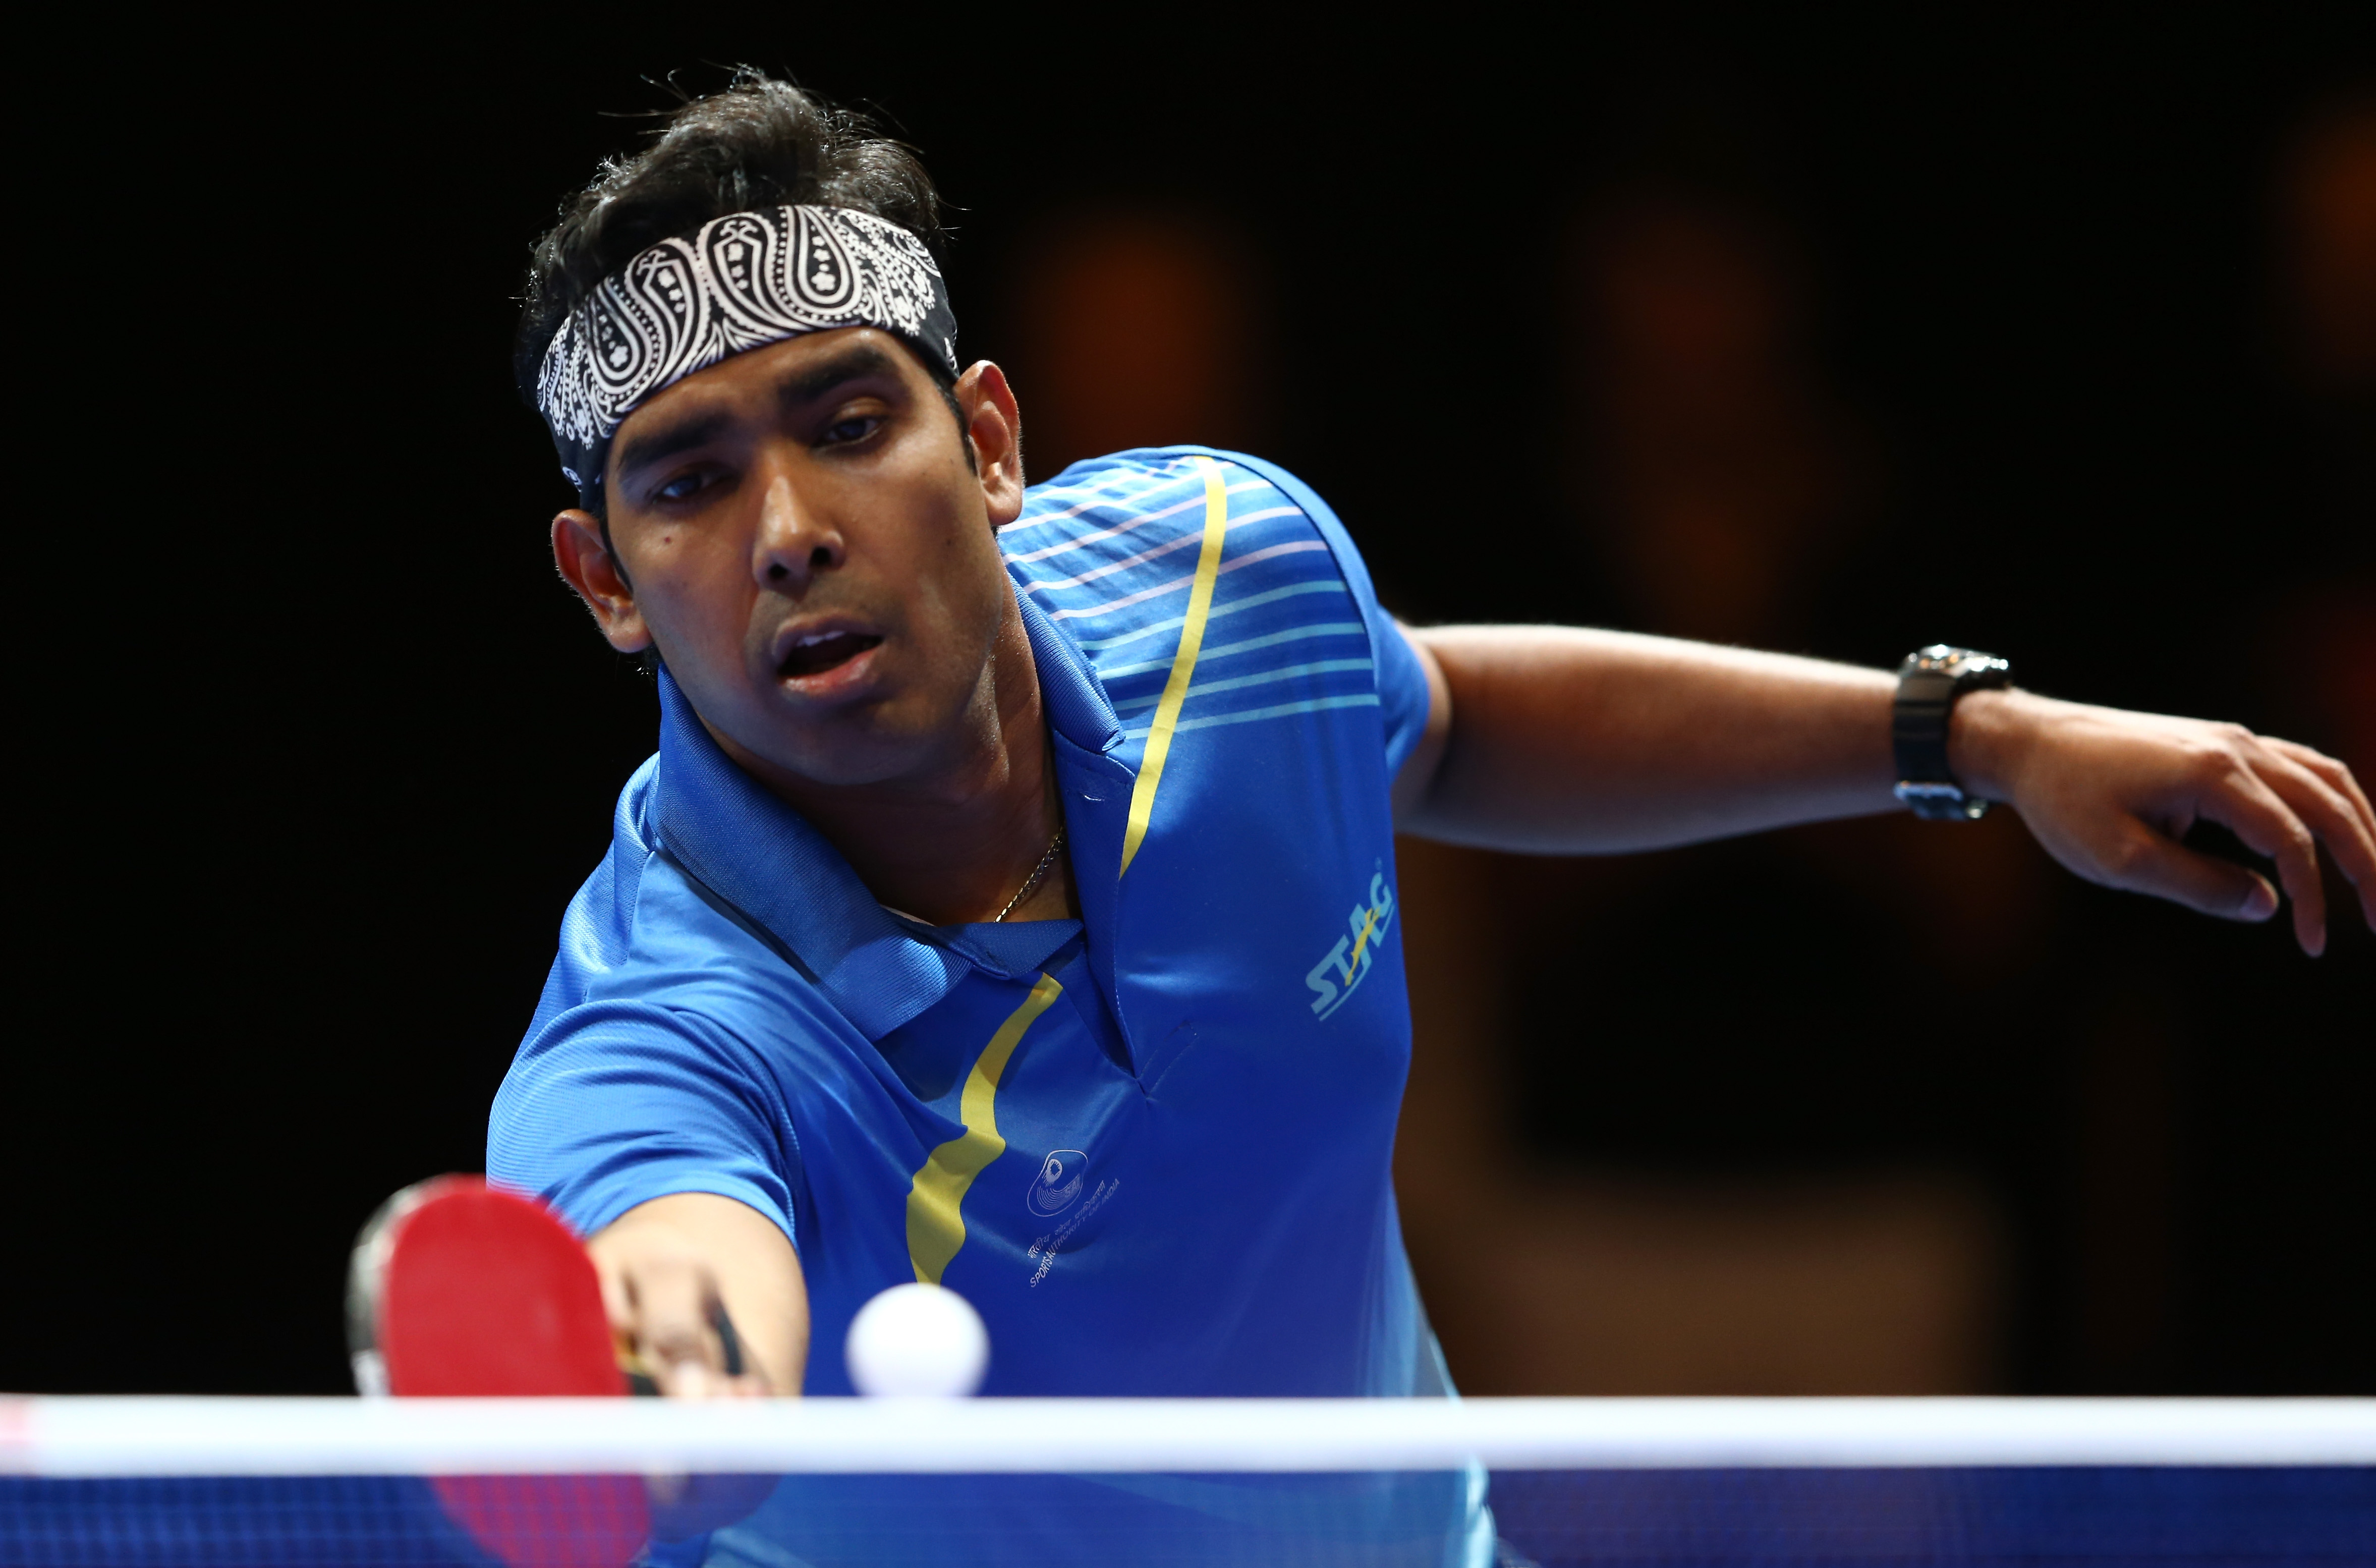 WTT Contender 2021 | Sharath Kamal crashes out, ends India's voyage